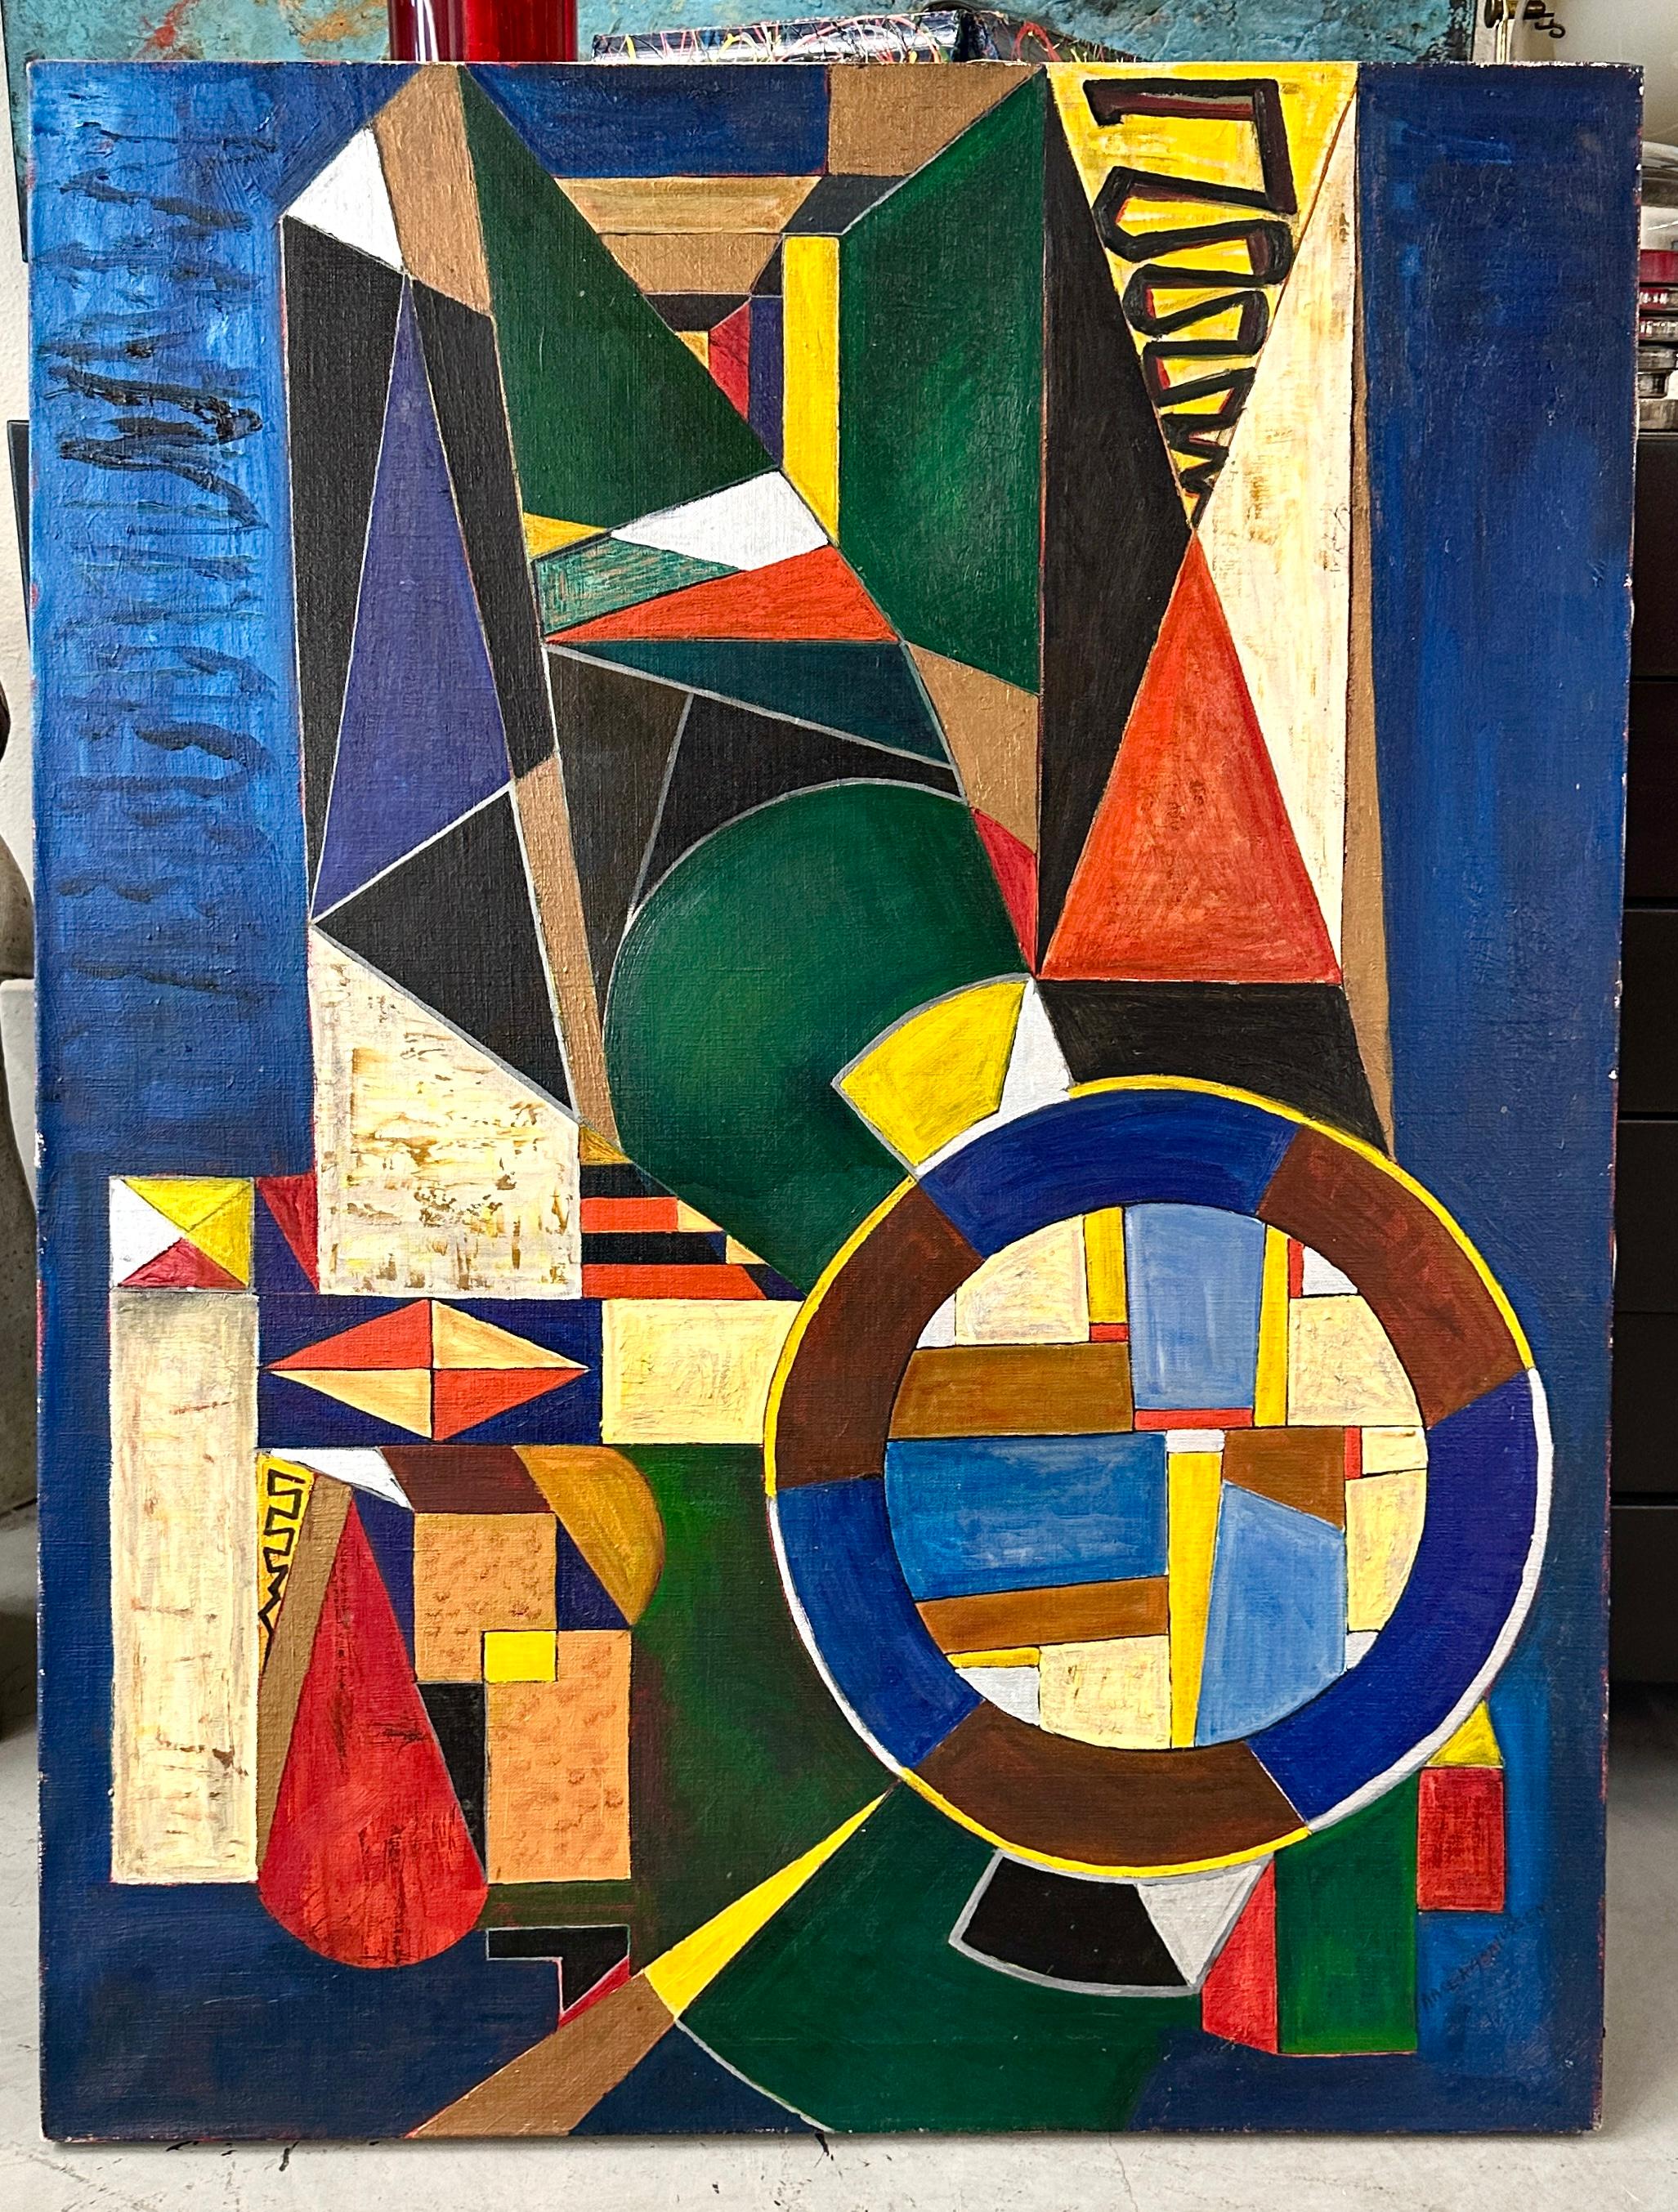 A vibrant geometric abstract by the noted Danish artist Aage Rasmussen. Titled “Space Elements” on the back stretcher, the painting is signed lower left front and on the rear stretcher as well. In good condition with no frame, the work is likely